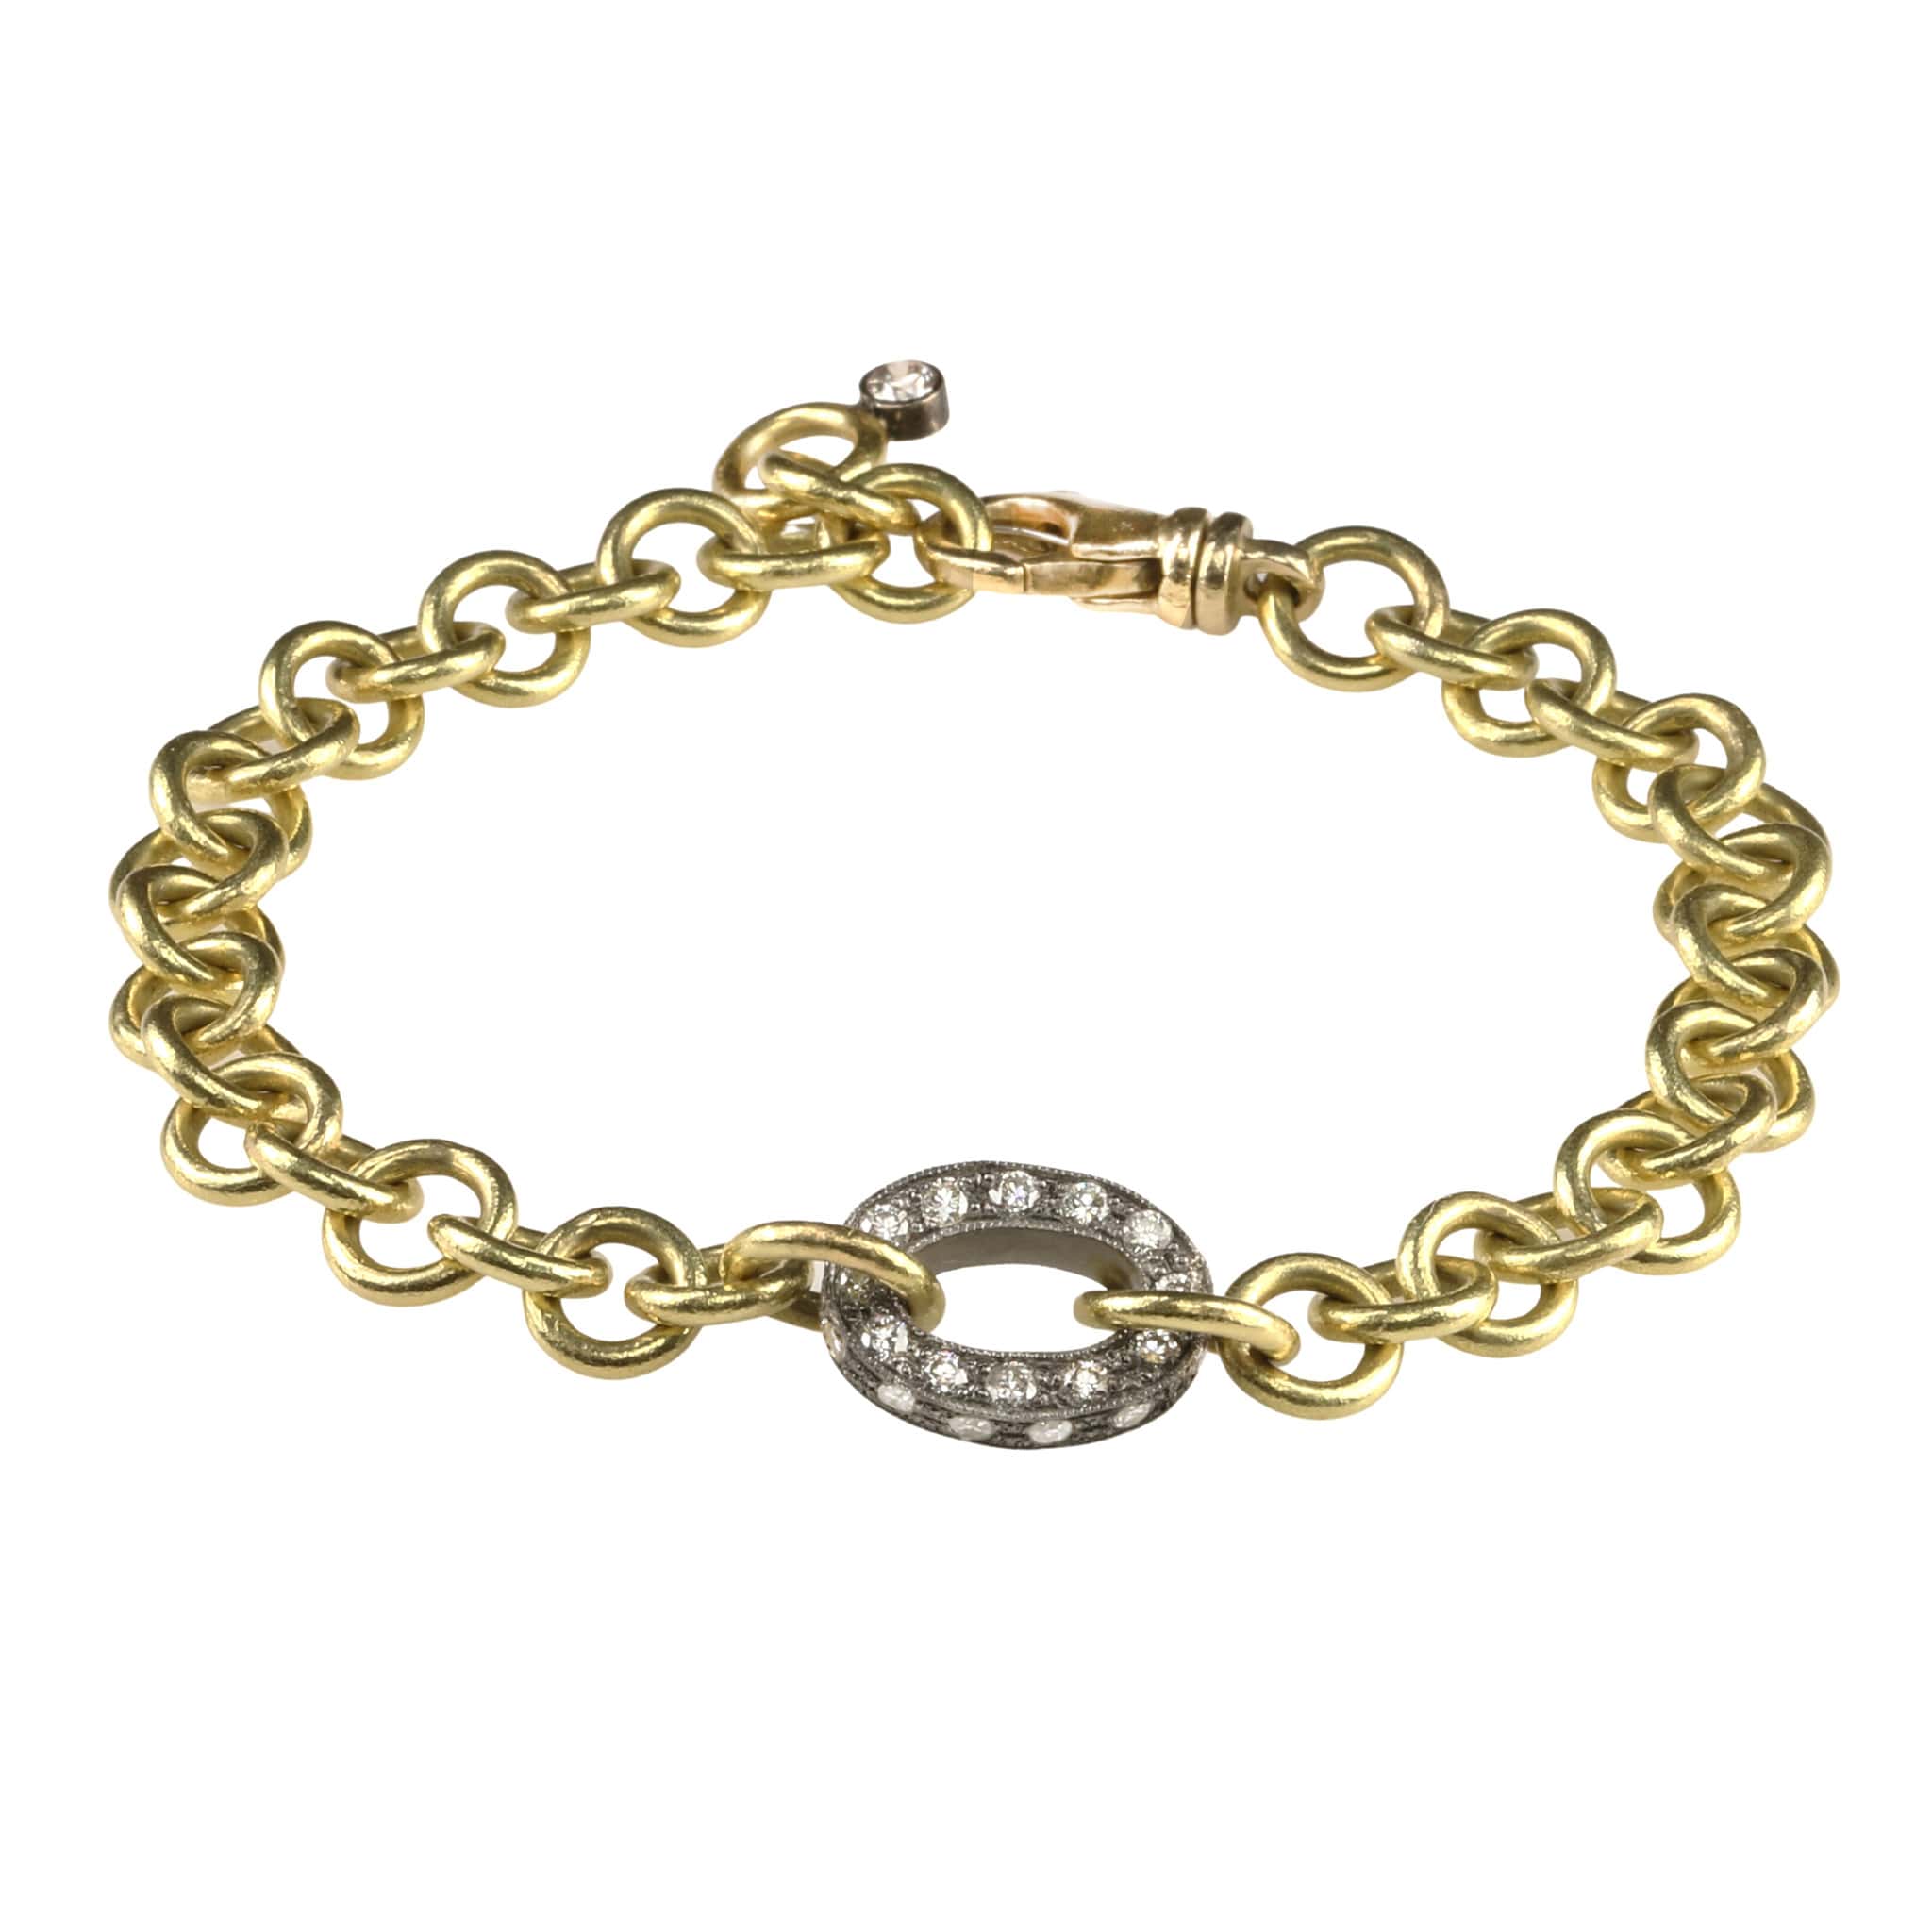 TAP by Todd Pownell Handmade Oval Chain Bracelet with Blackened Pave Diamond Center Link